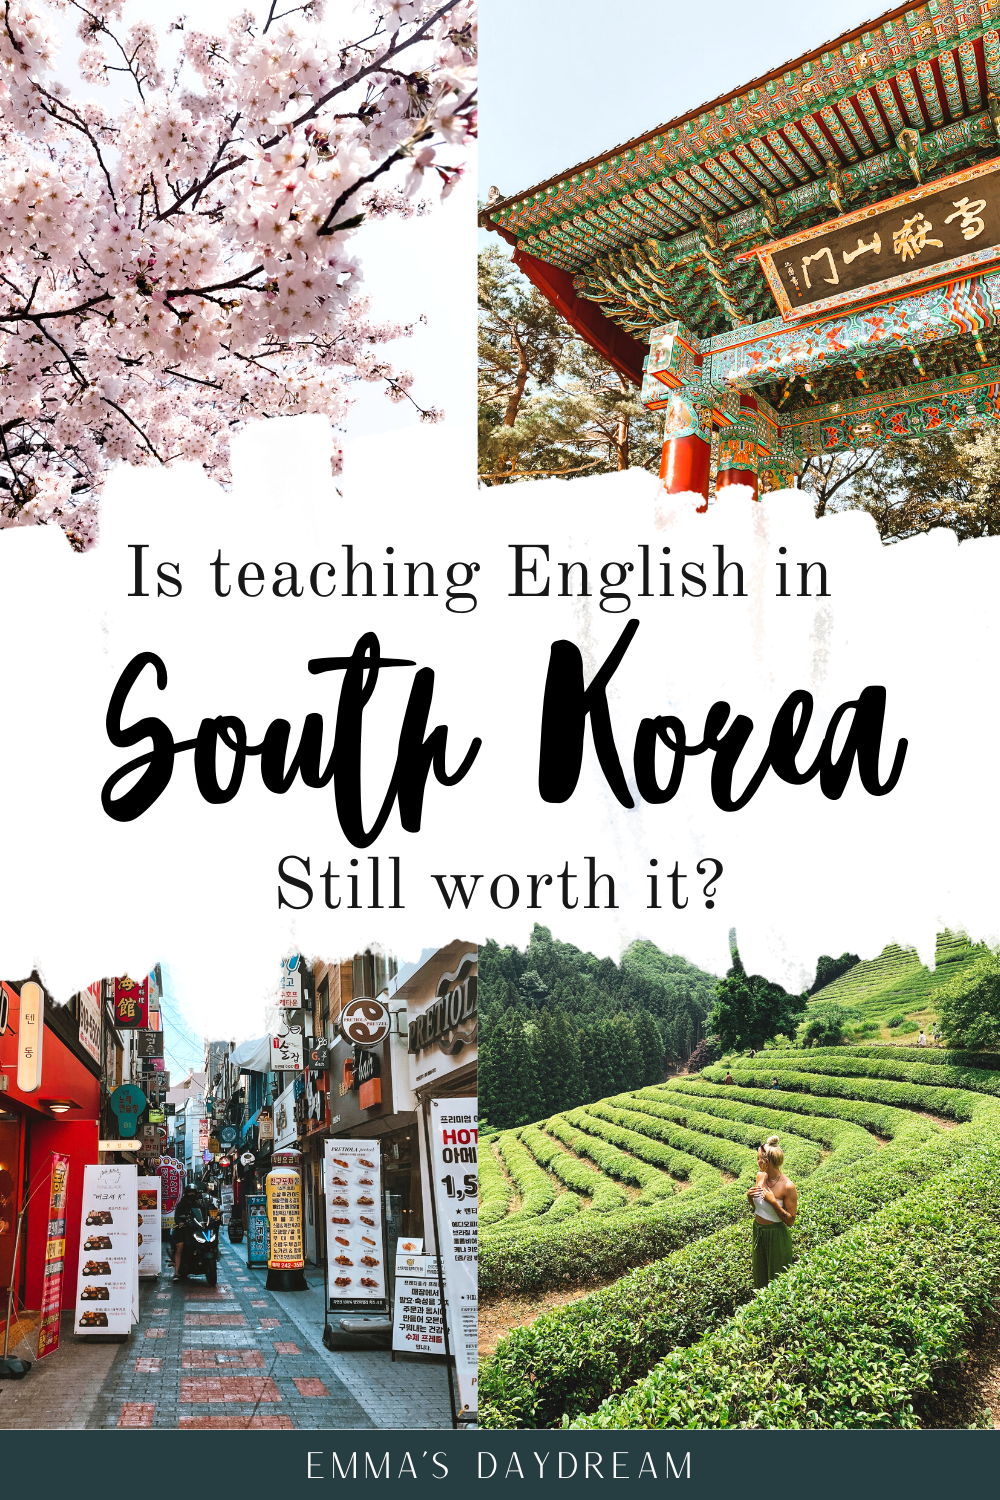 Is teaching English in South Korea worth it in 2022